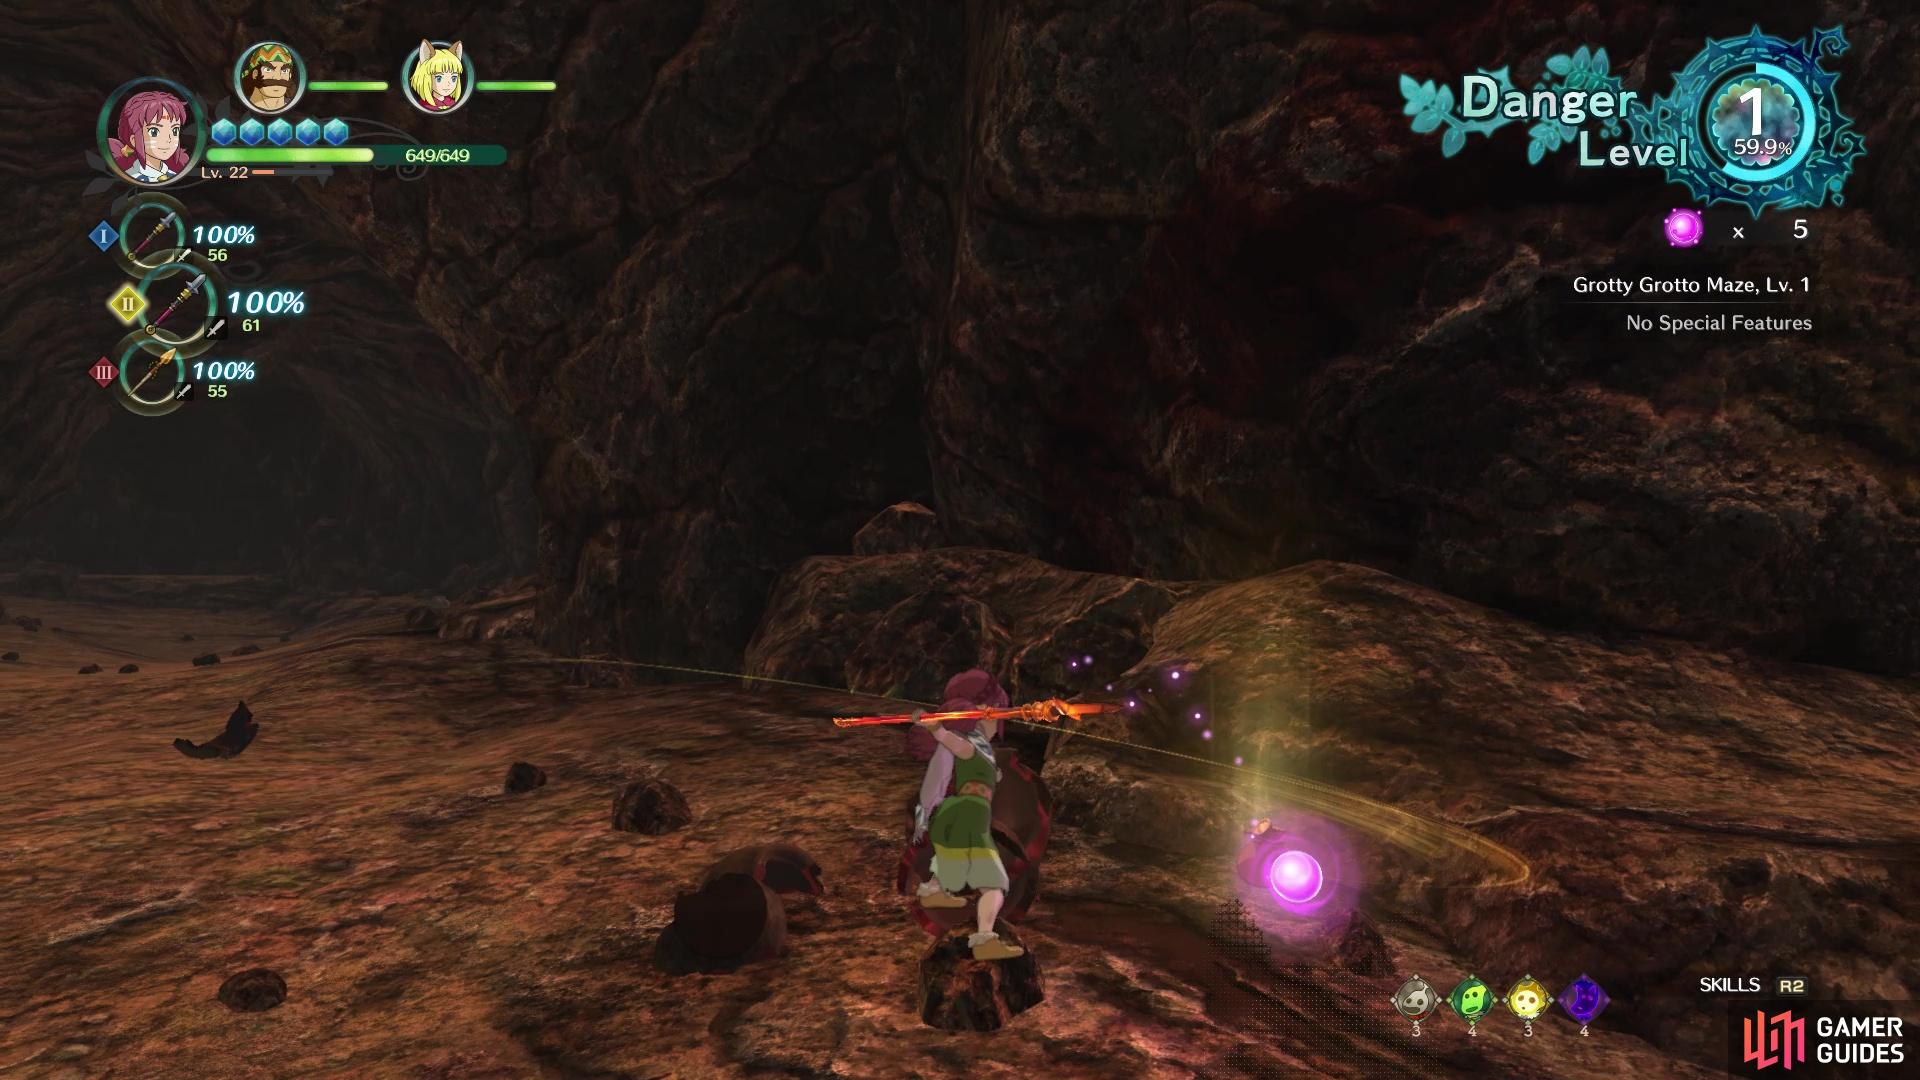 Pink Orbs can be acquired from breaking pots or defeating enemies